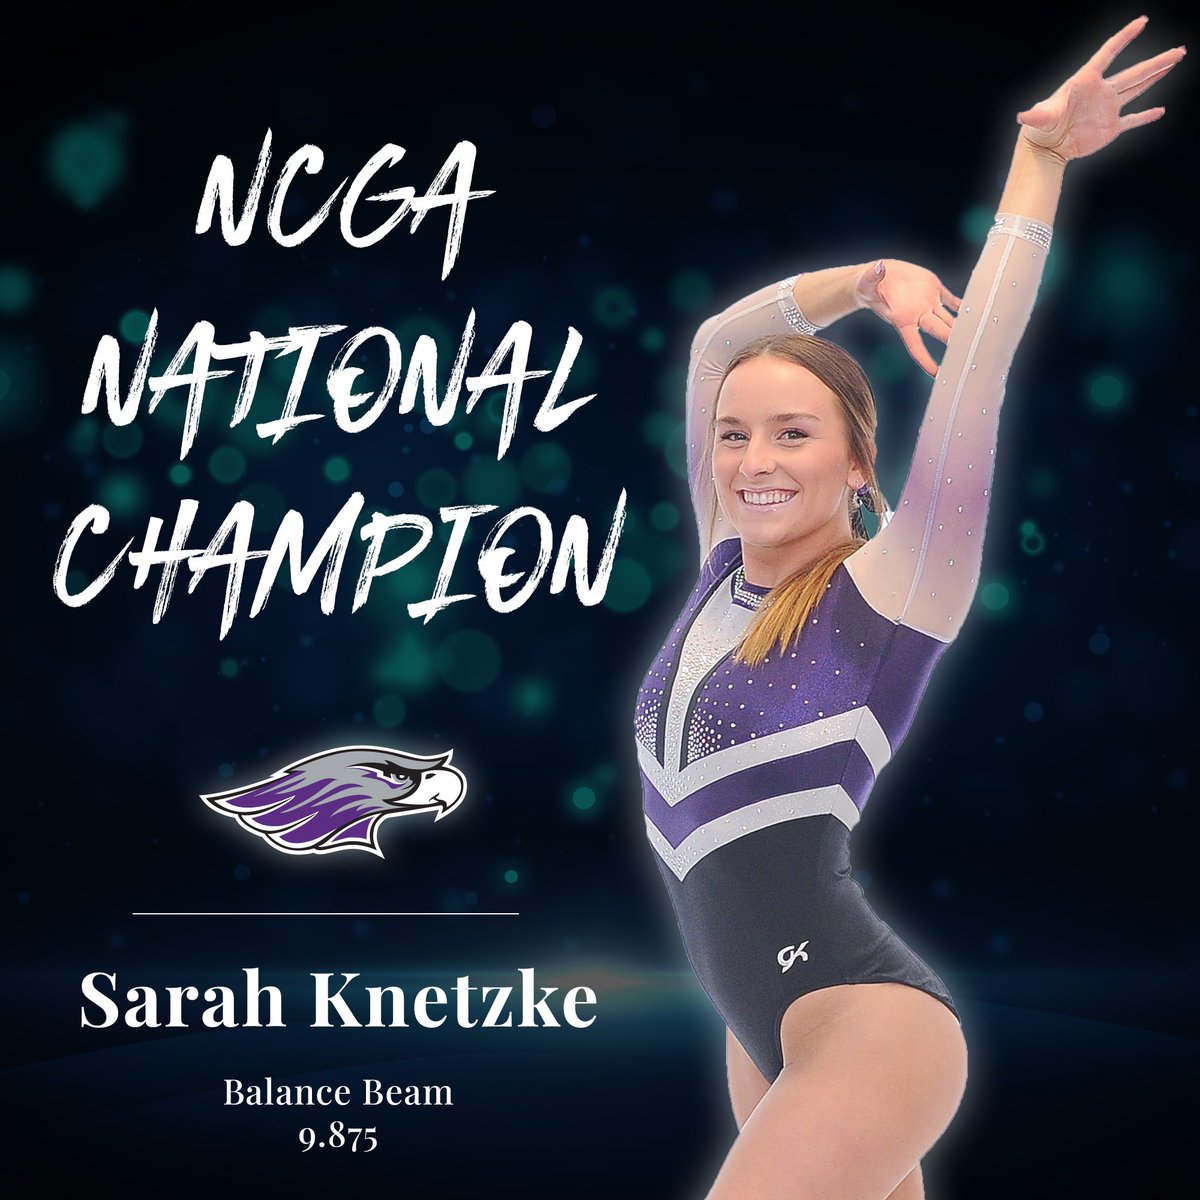 Congratulations to national champions Emily North (all-around) and Sarah Knetzke (balance beam)! This duo led the #Warhawks to fifth place at the 2022 @d3ncga Championship with a team score of 191.975.

#NCGAGym | #PoweredByTradition